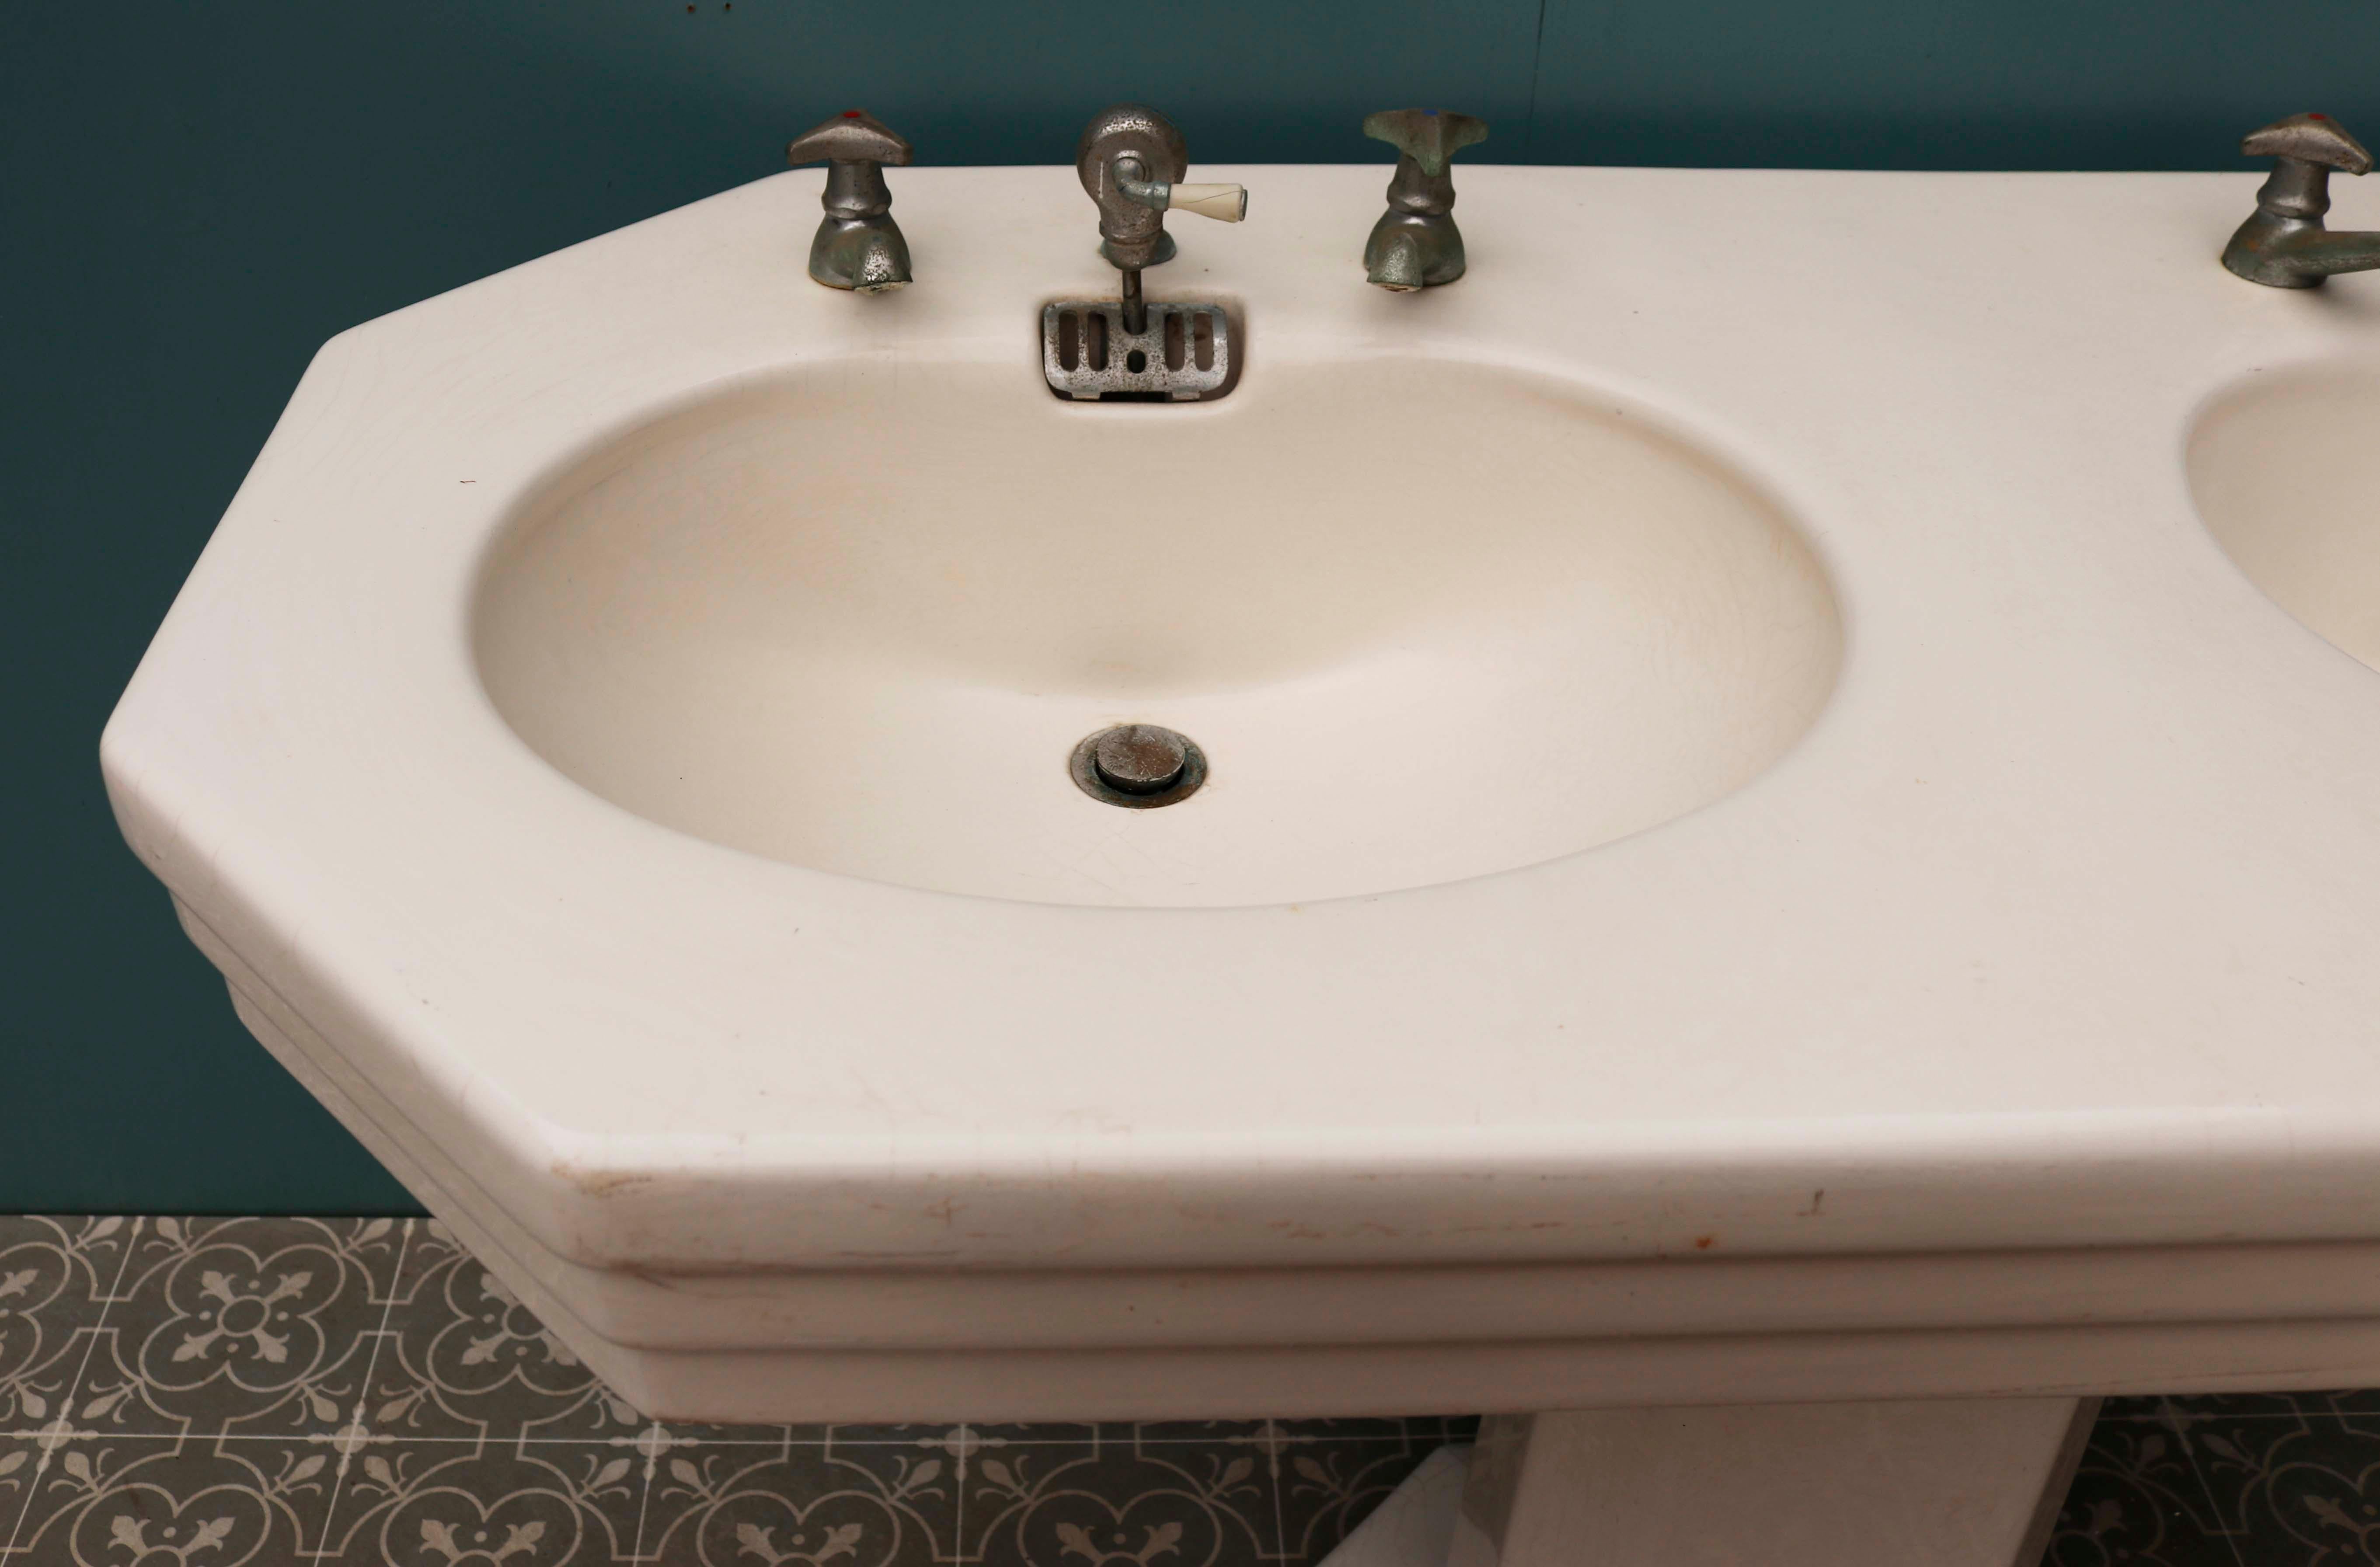 Antique Art Deco double sink. This original, French double basin has been produced in the style of Art Deco in the early 20th century. It displays a wonderful octagon inspired shape around the edges of the basin in true Art Deco style. The sink is